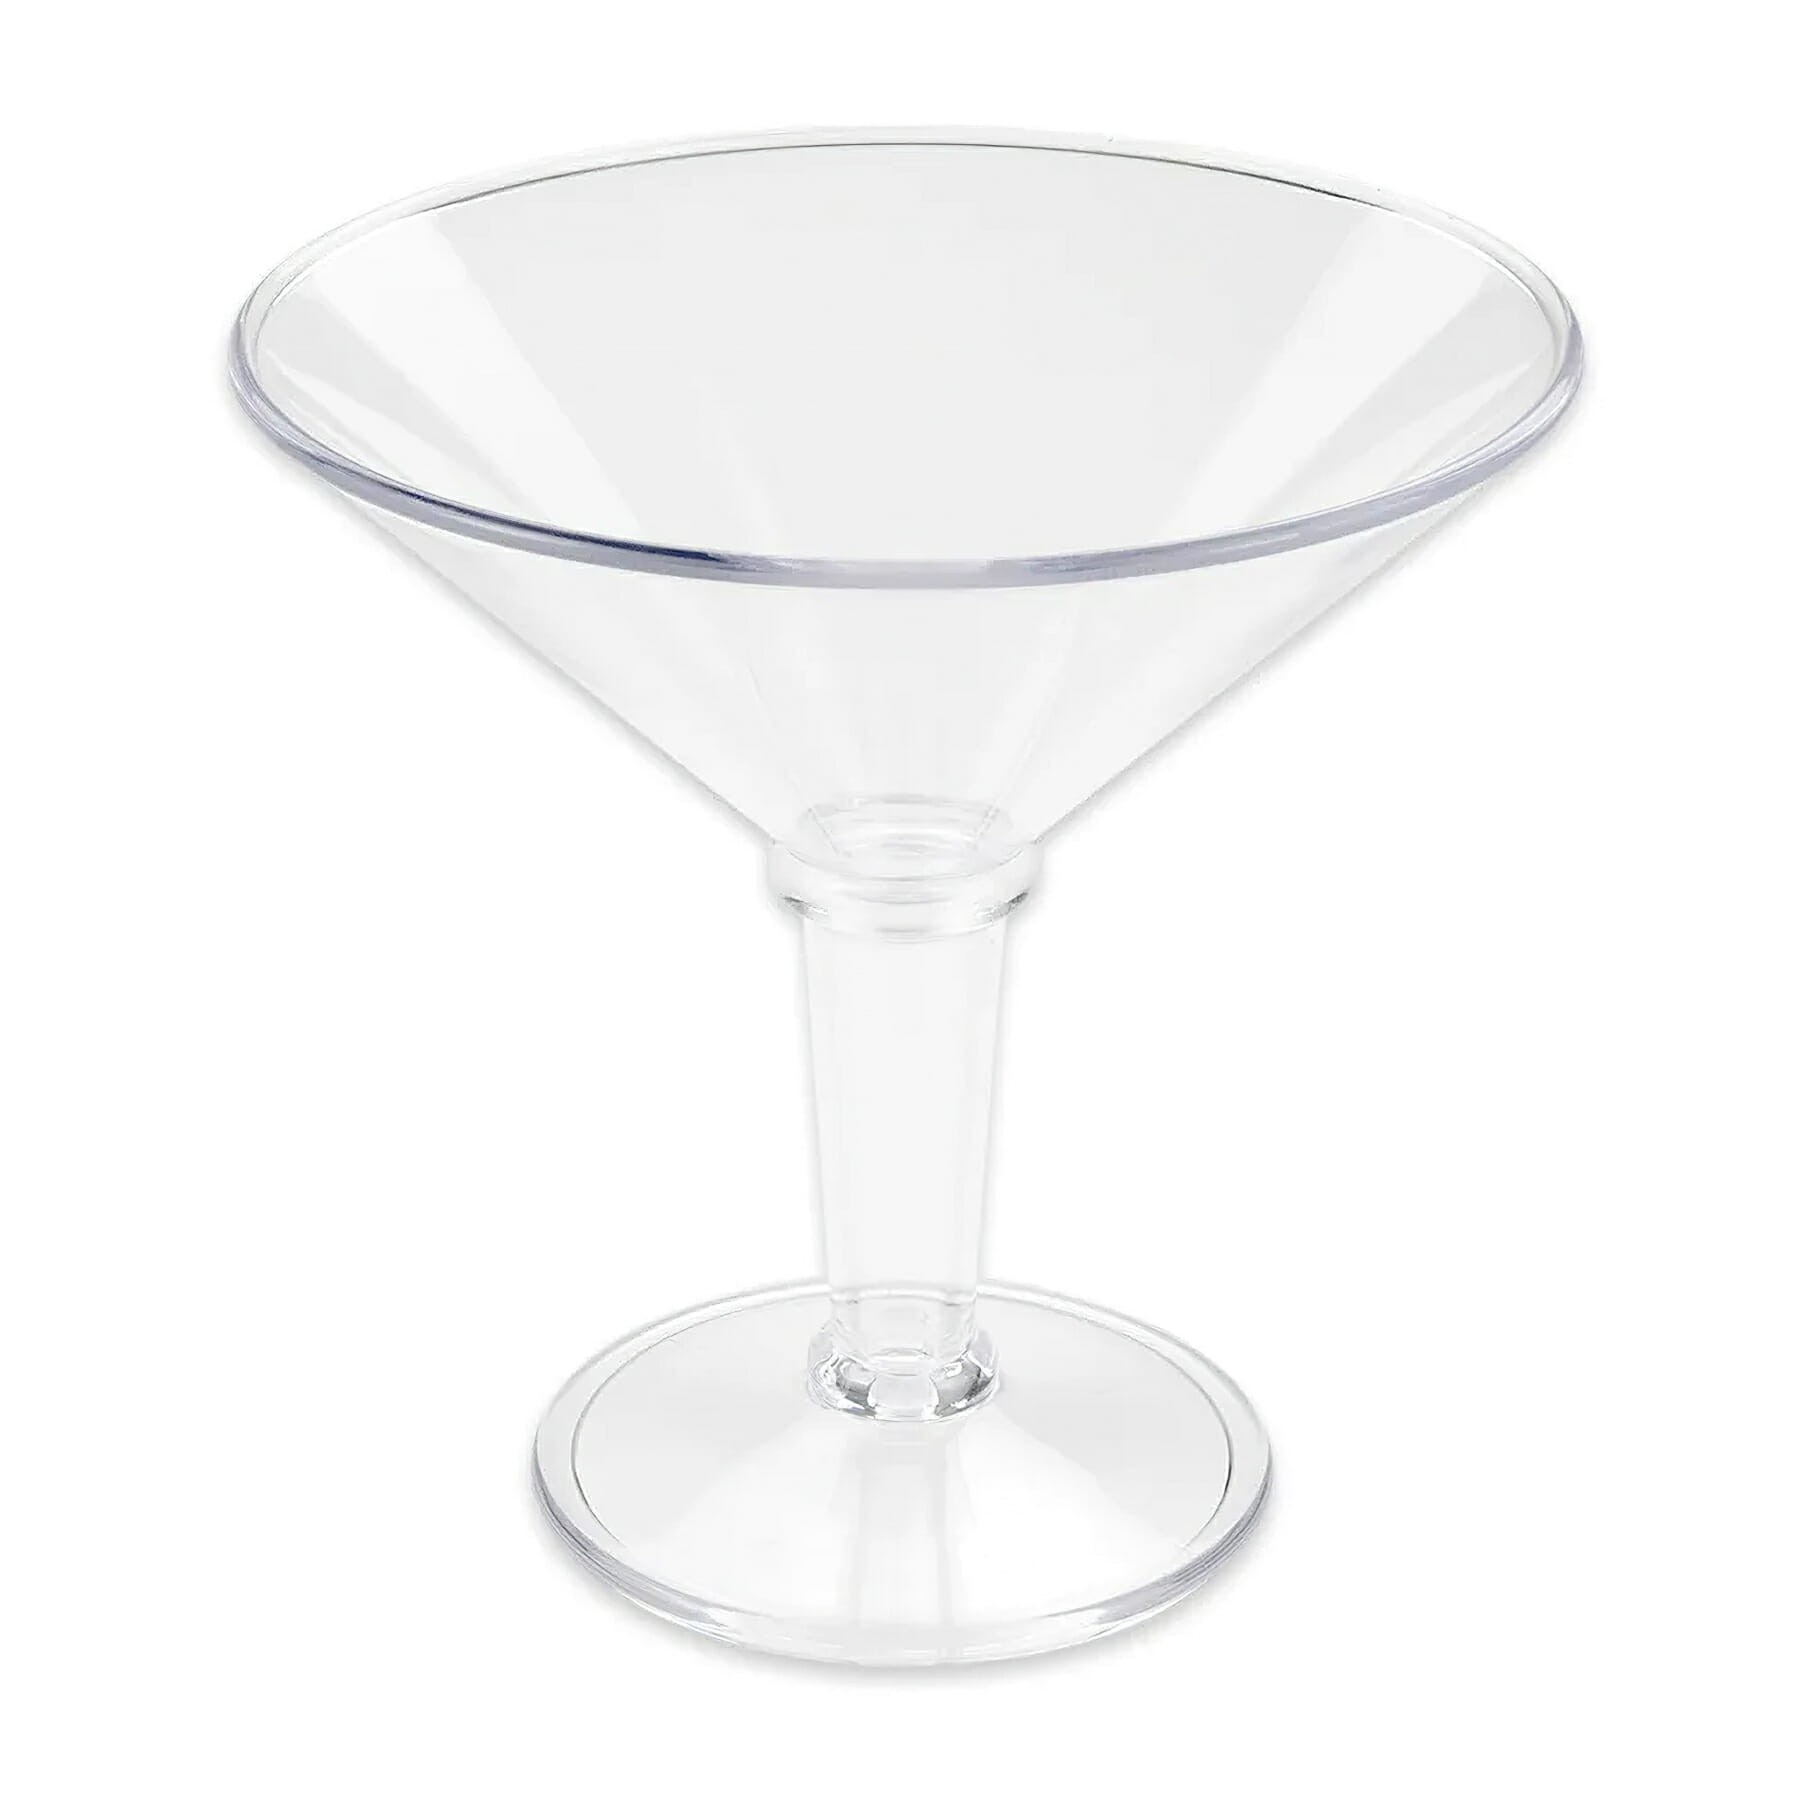 Events With Design - Inventory - Theme props - Large martini glass vase